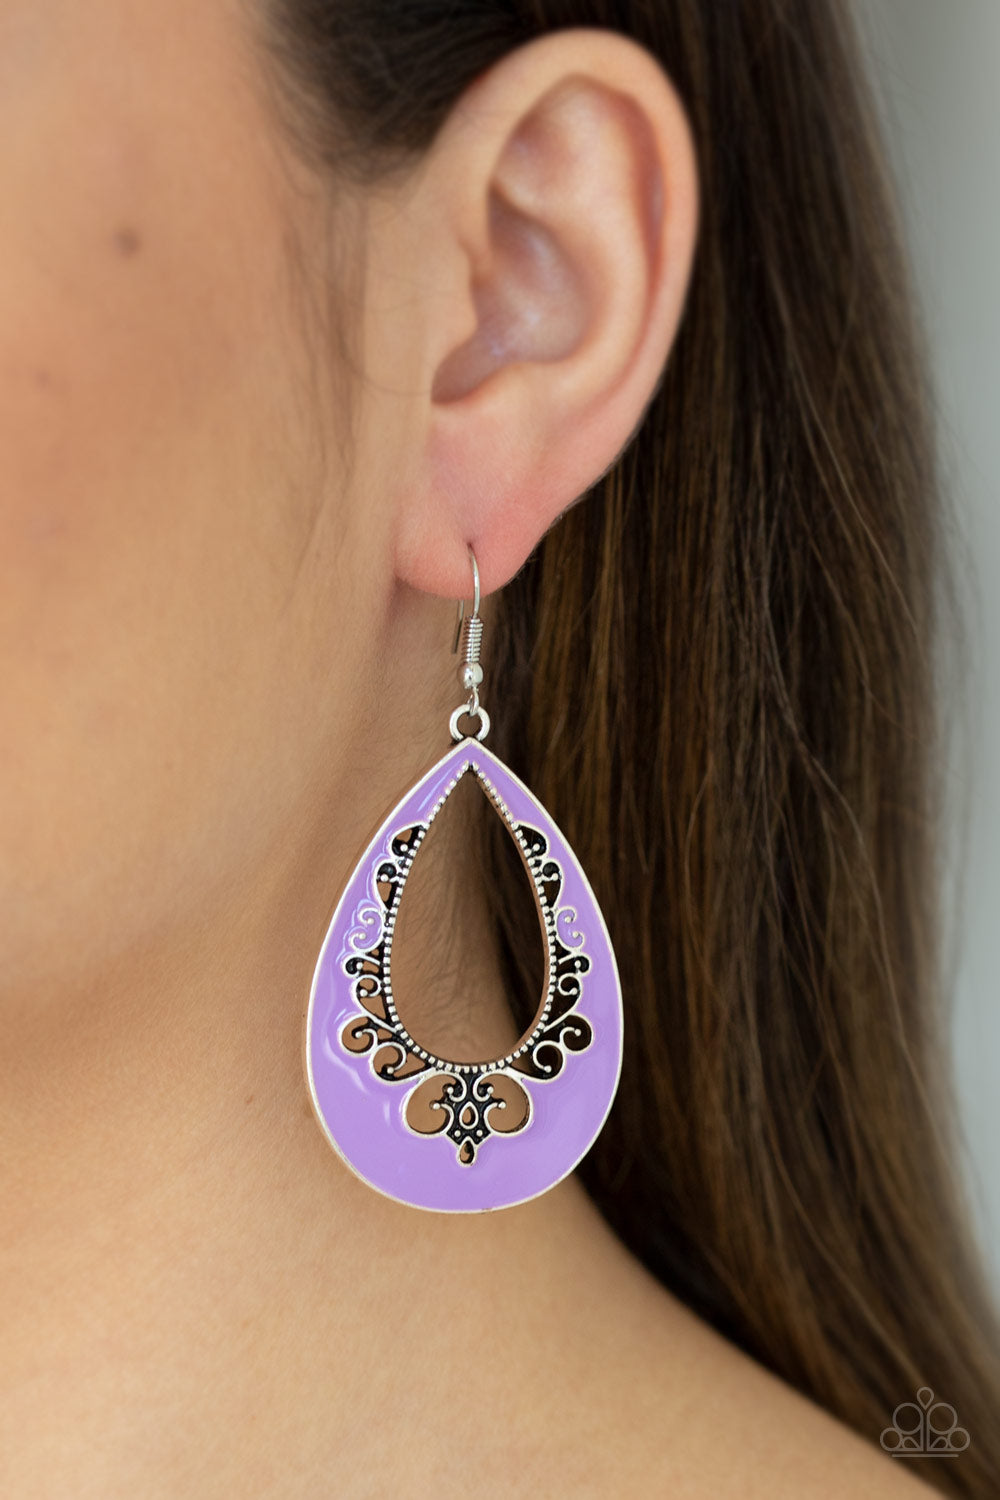 Compliments To The CHIC - Purple Teardrop Earrings - Paparazzi Accessories - All That Sparkles XOXO